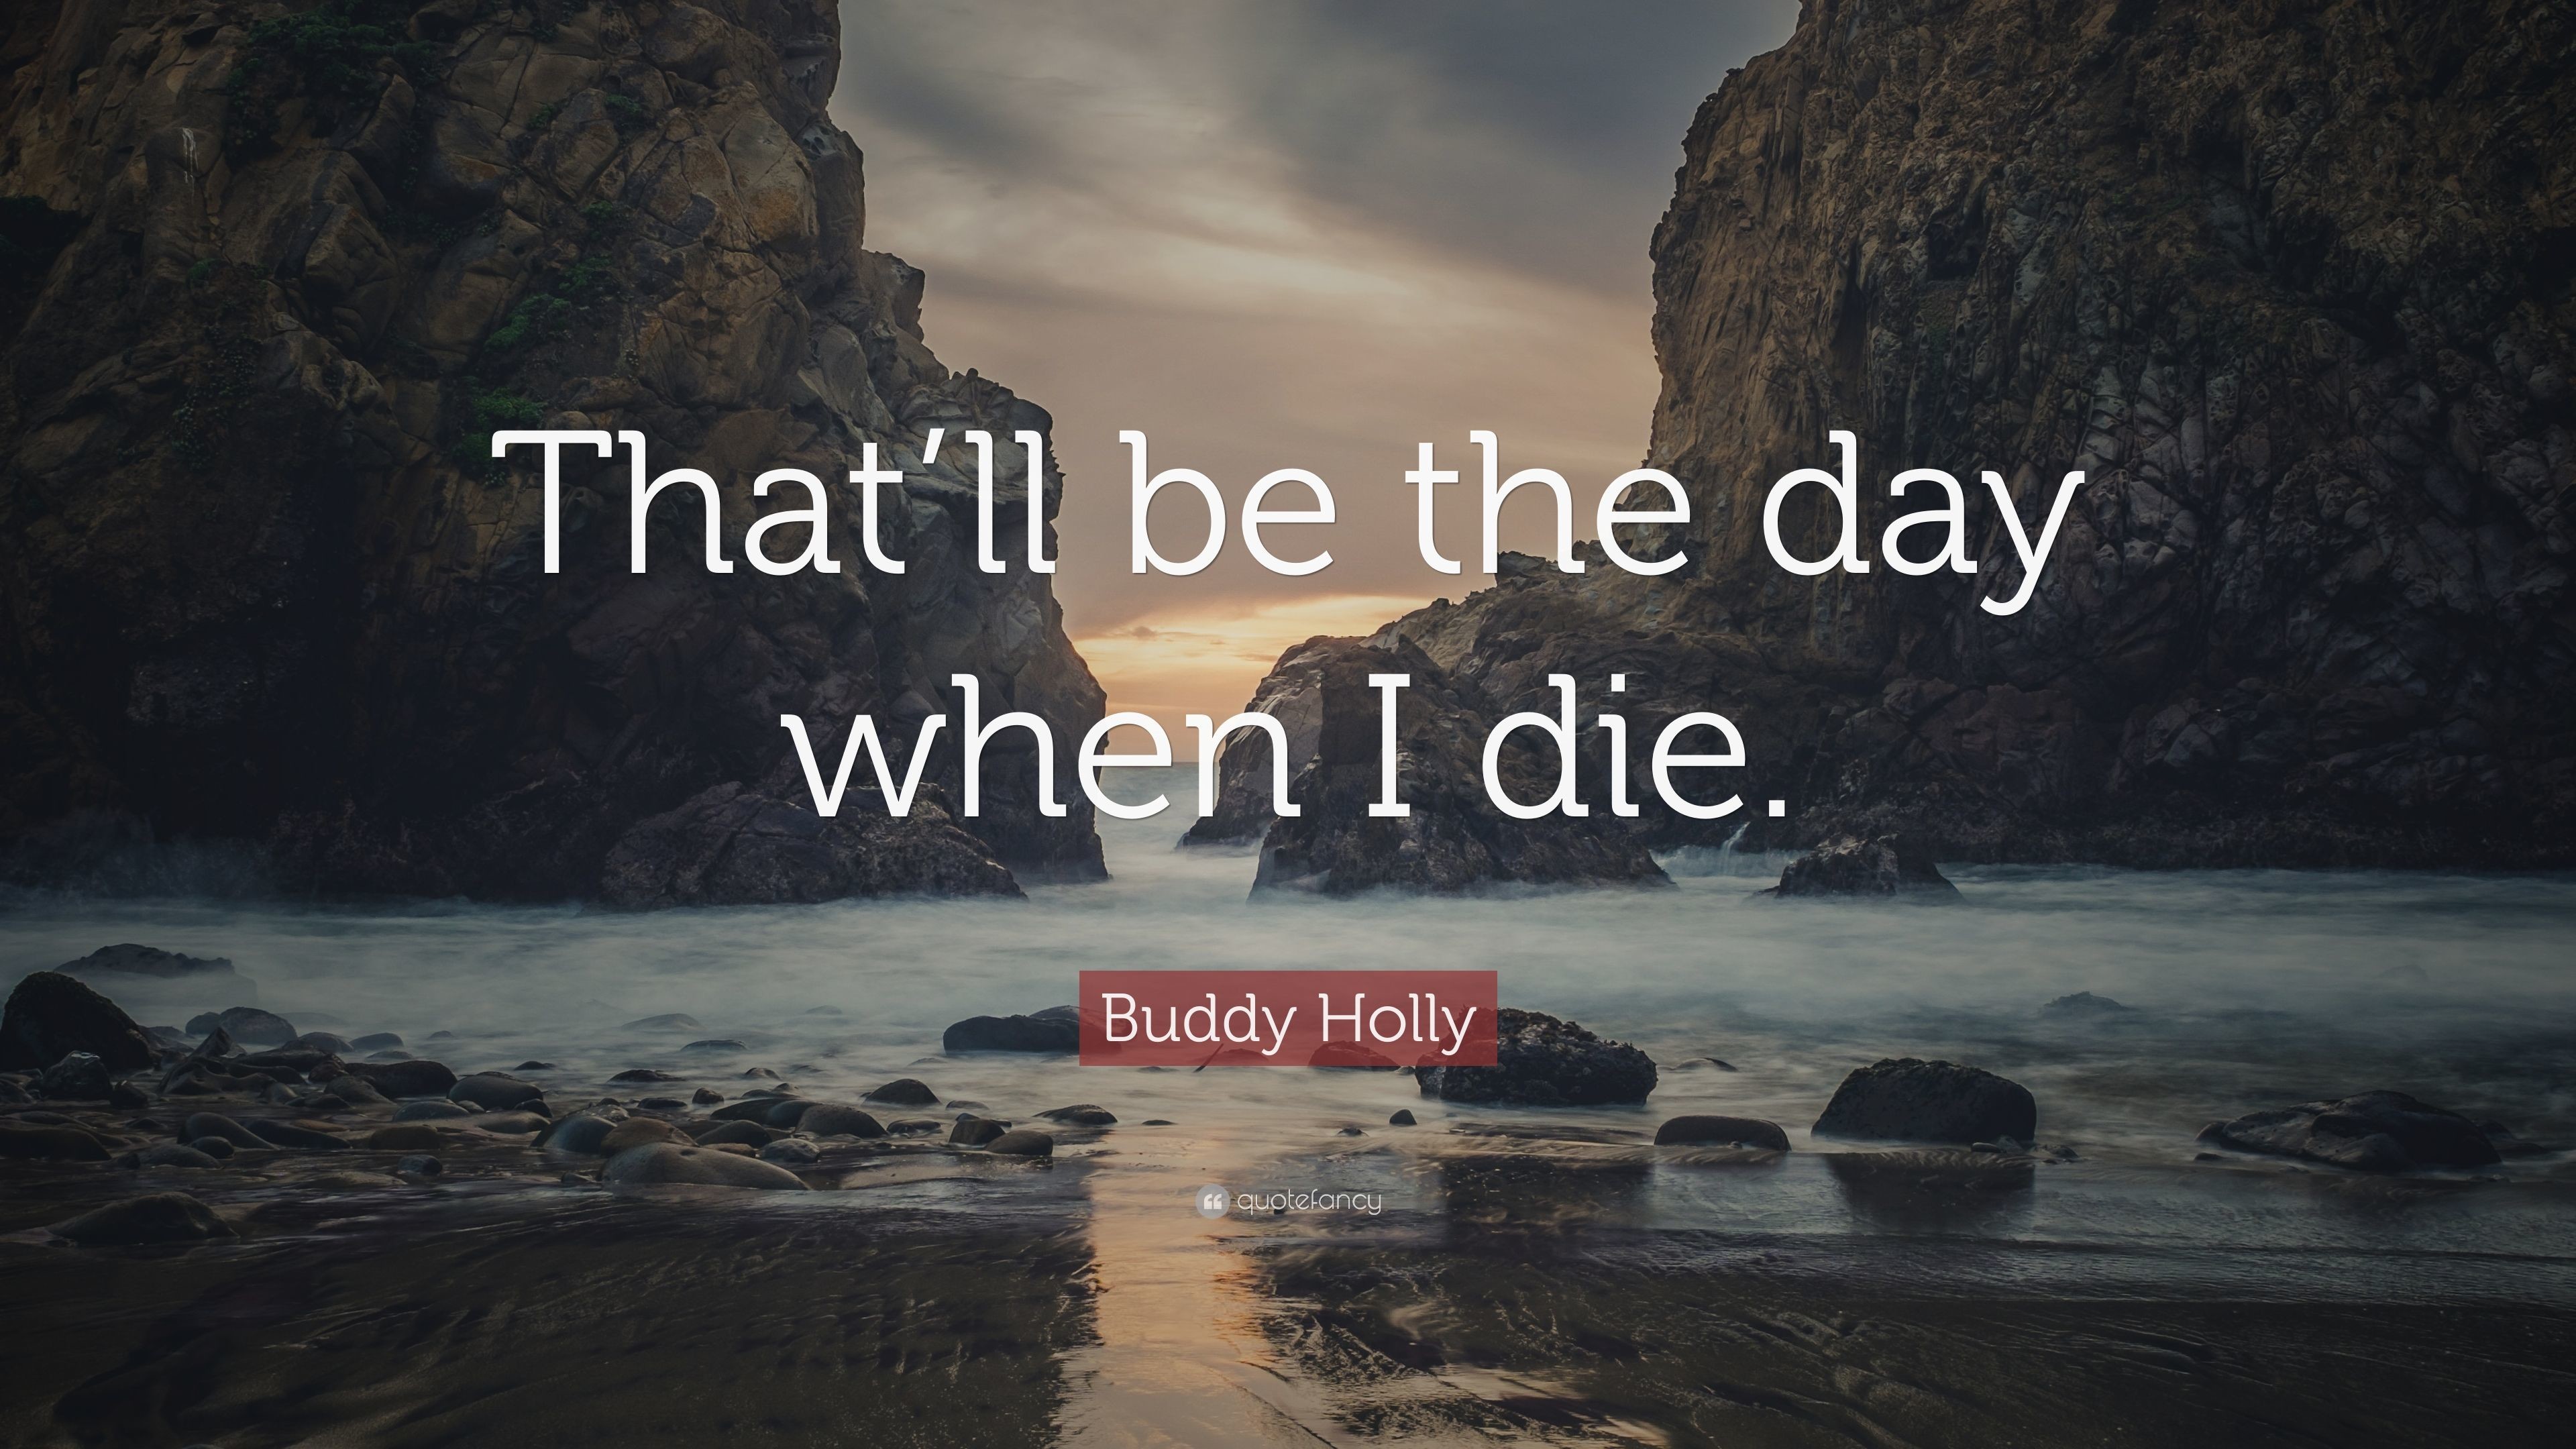 3840x2160 Buddy Holly Quote: “That'll be the day when I die.”